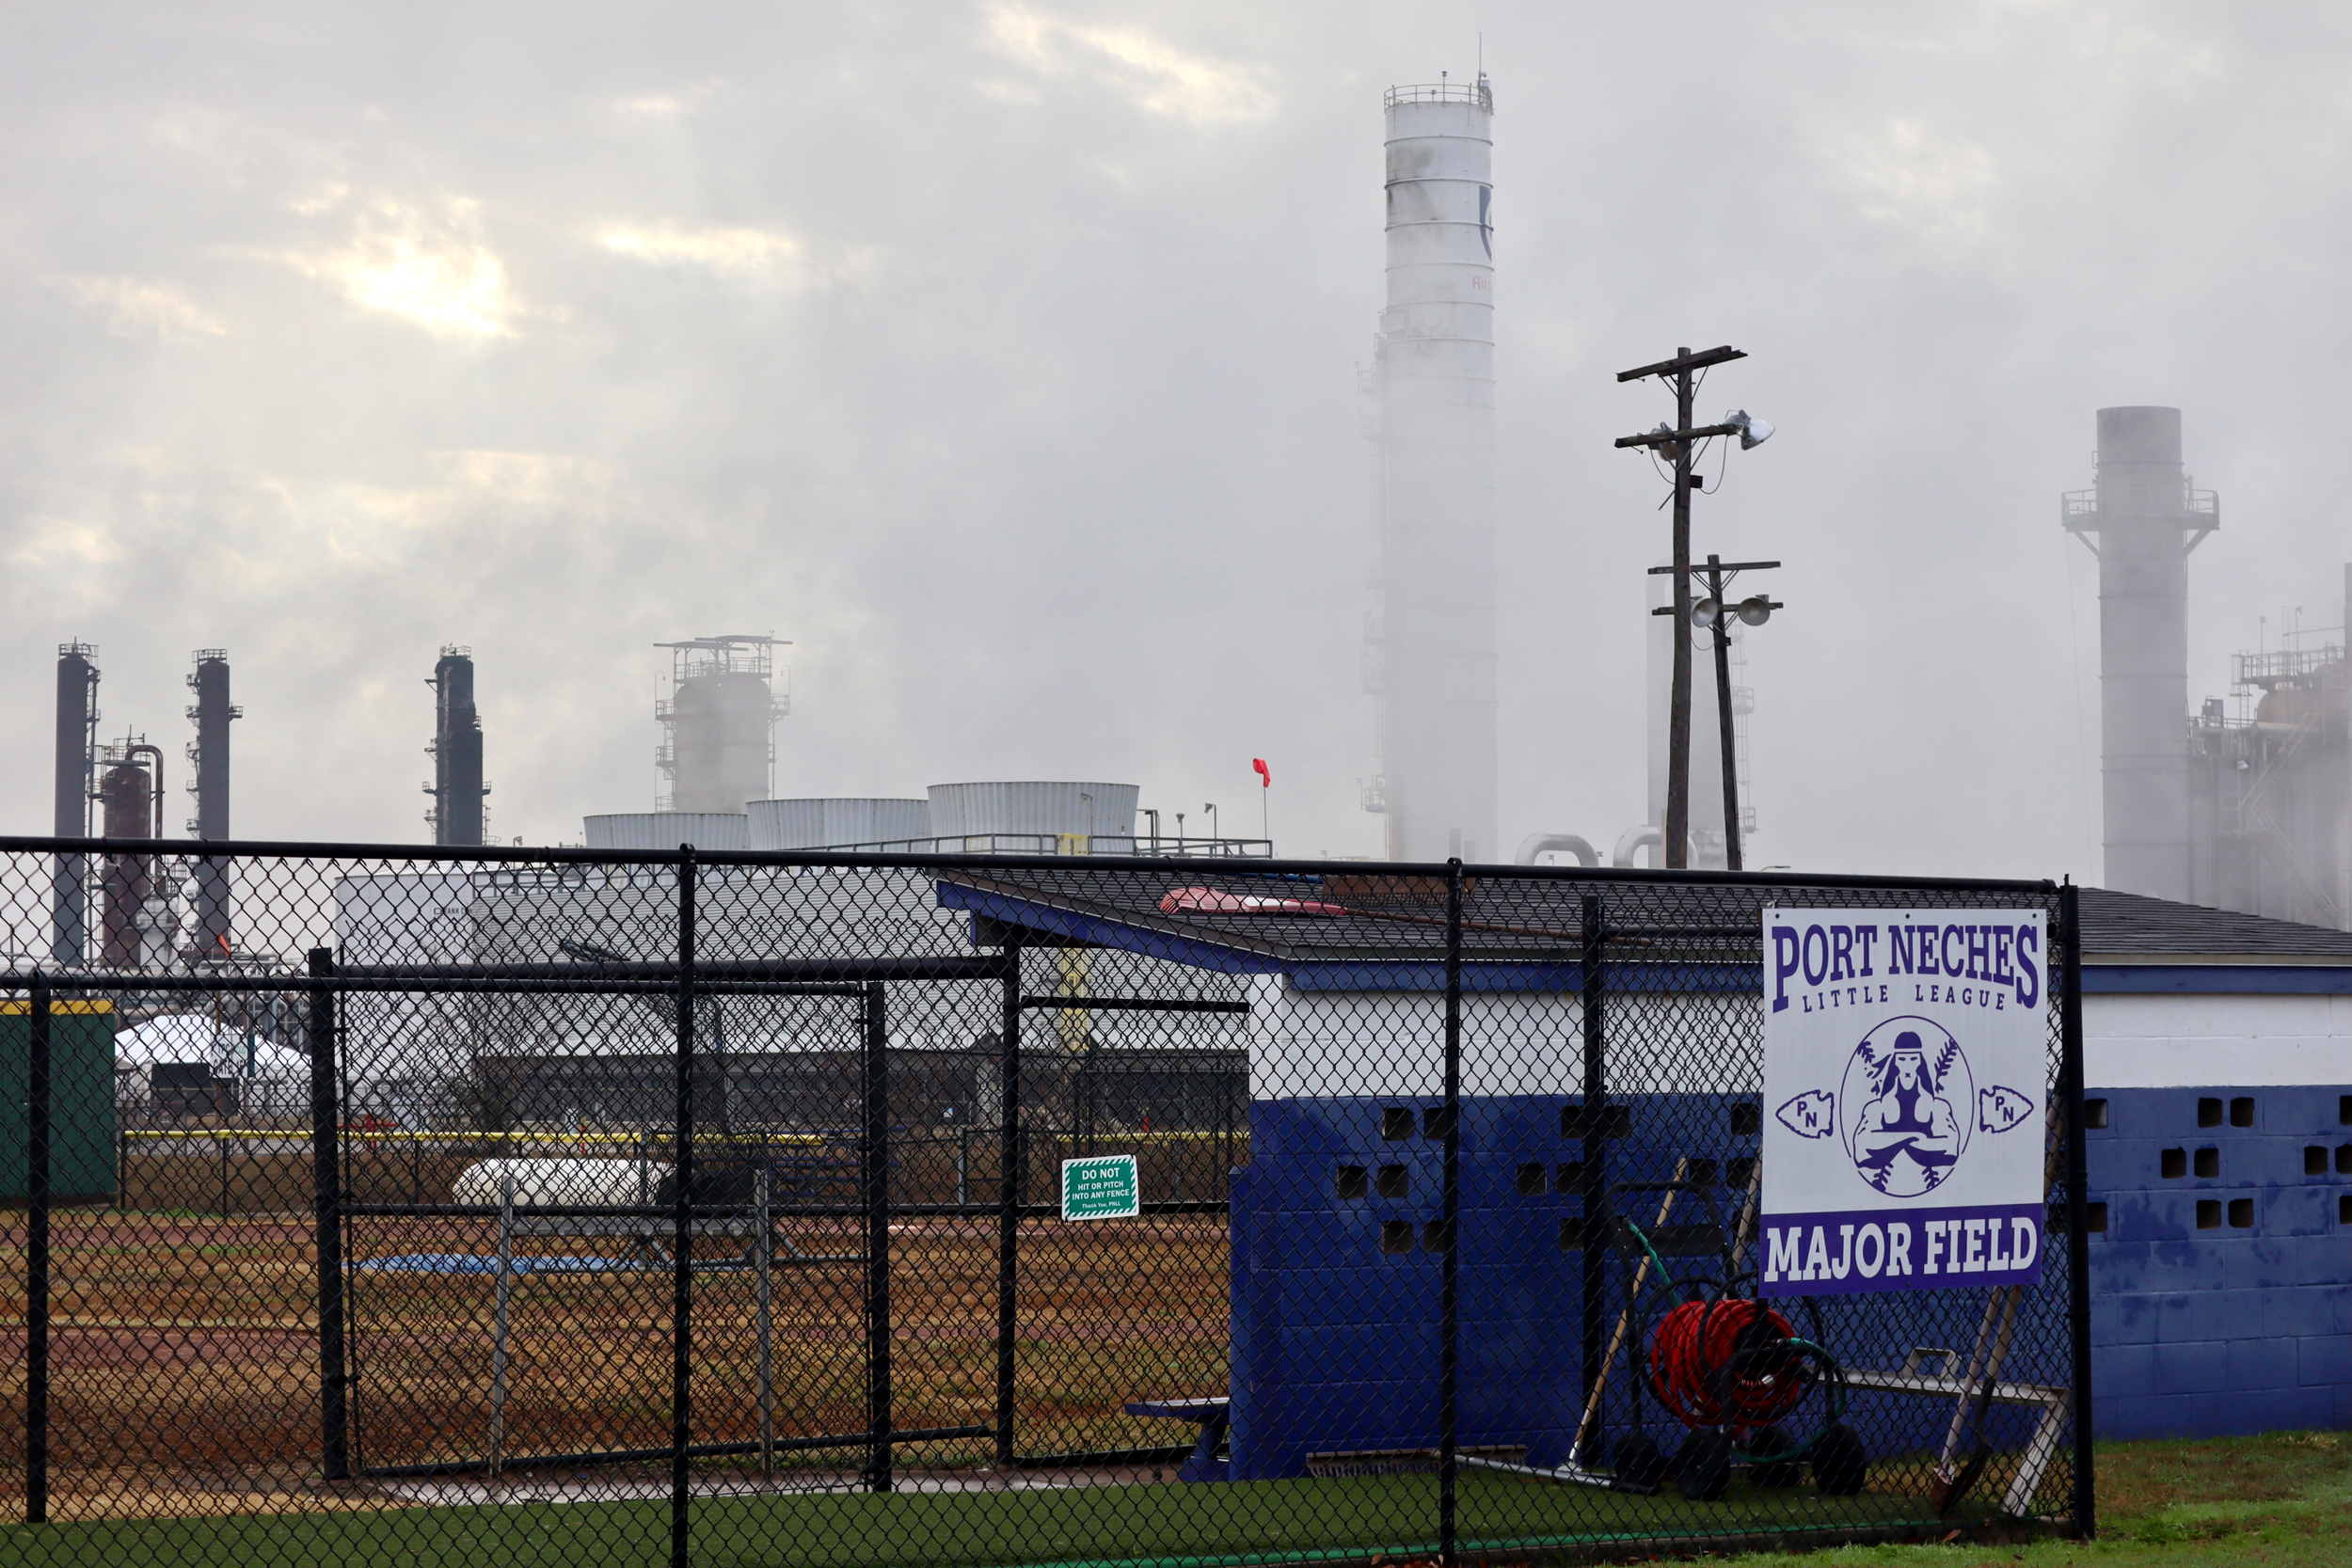 This youth baseball field is next to the TPC Group chemical plant in Port Neches, Texas. Explosions and a fire occurred at the plant on November 27, 2019. Credit: James Bruggers/Inside Climate News